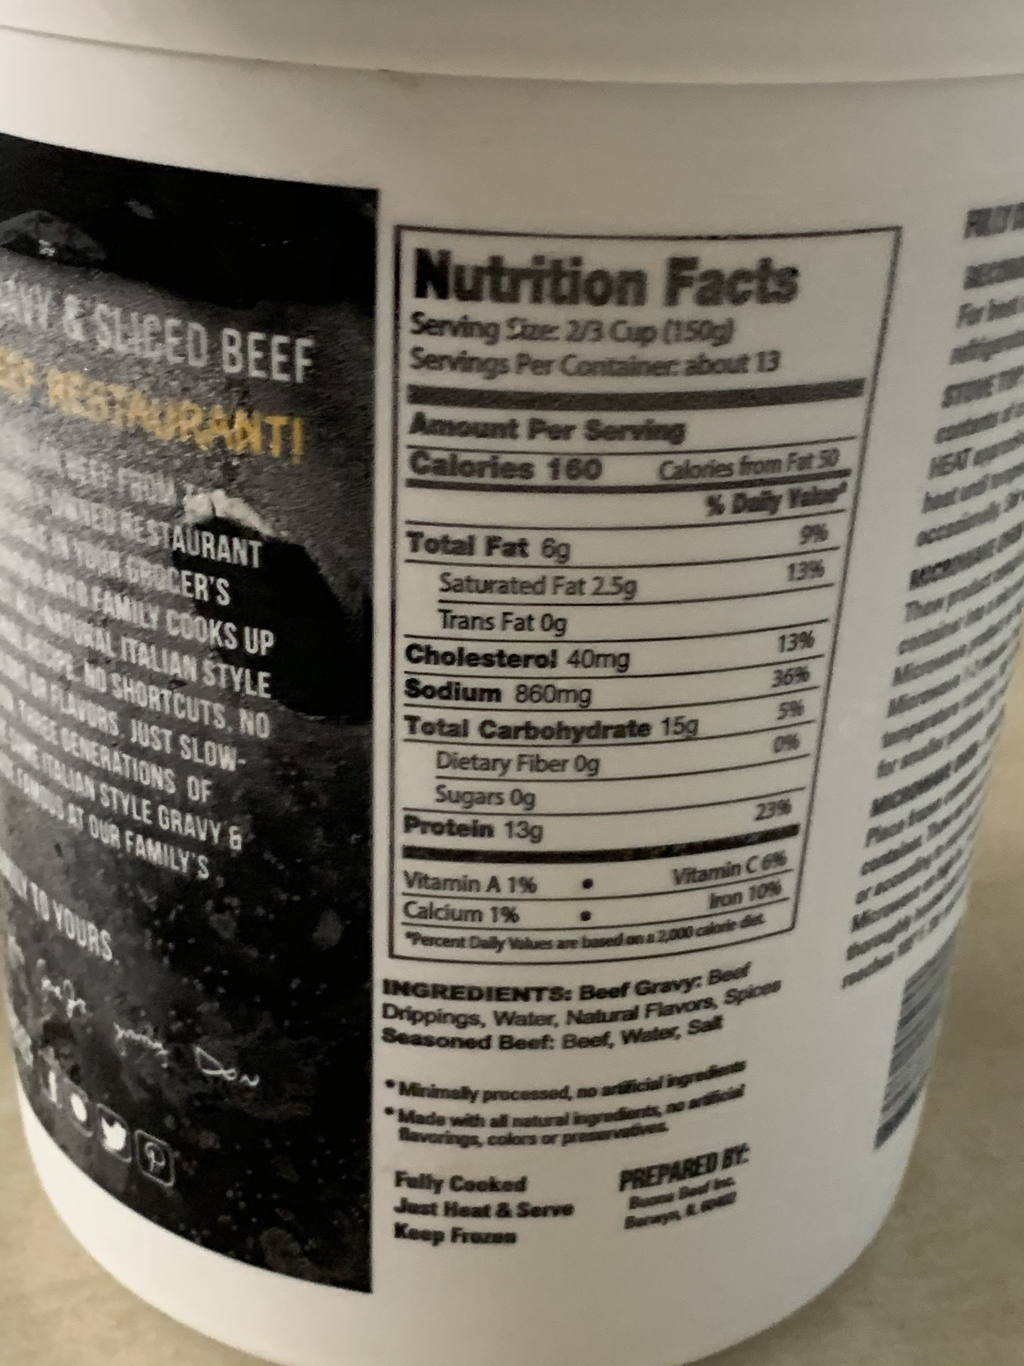 Aldi Review - Buona Italian Style Gravy & Sliced Beef Review Nutrition Facts